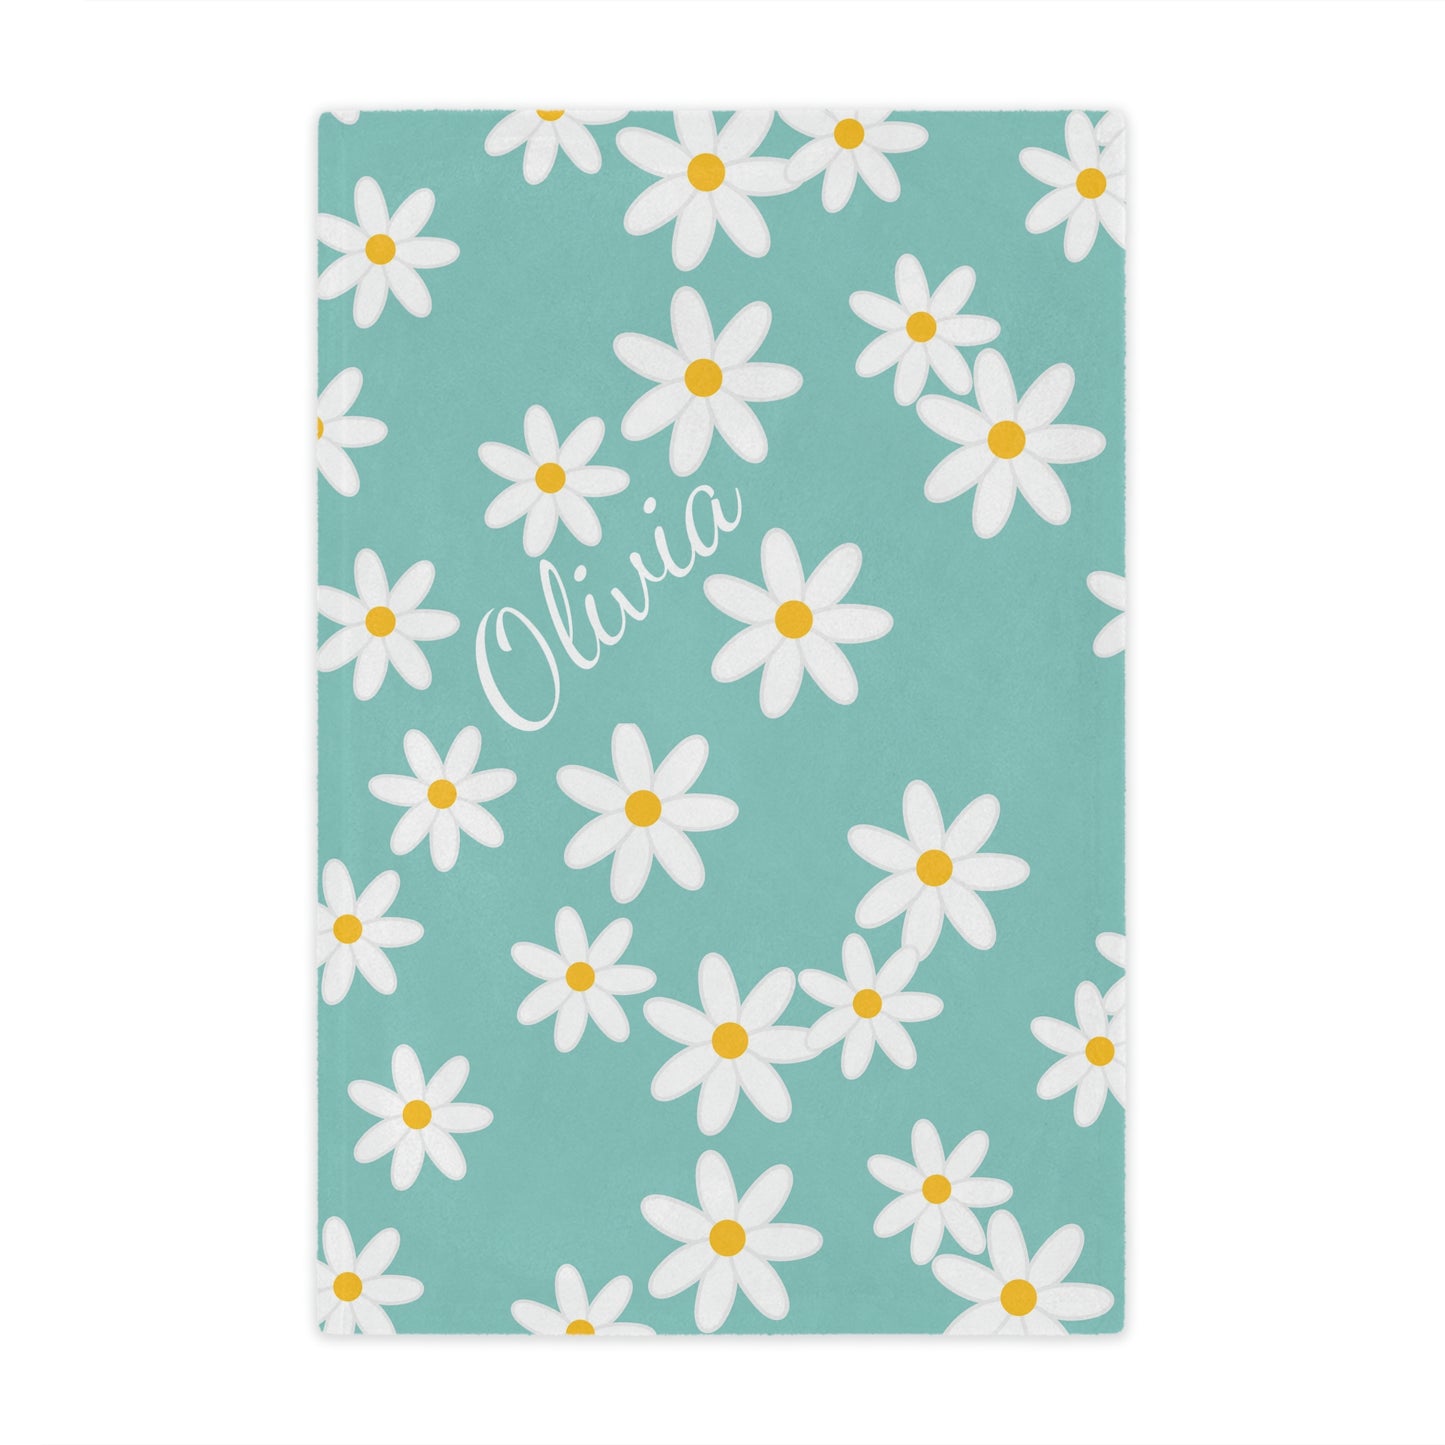 Personalized With Name Teal Daisy Blanket